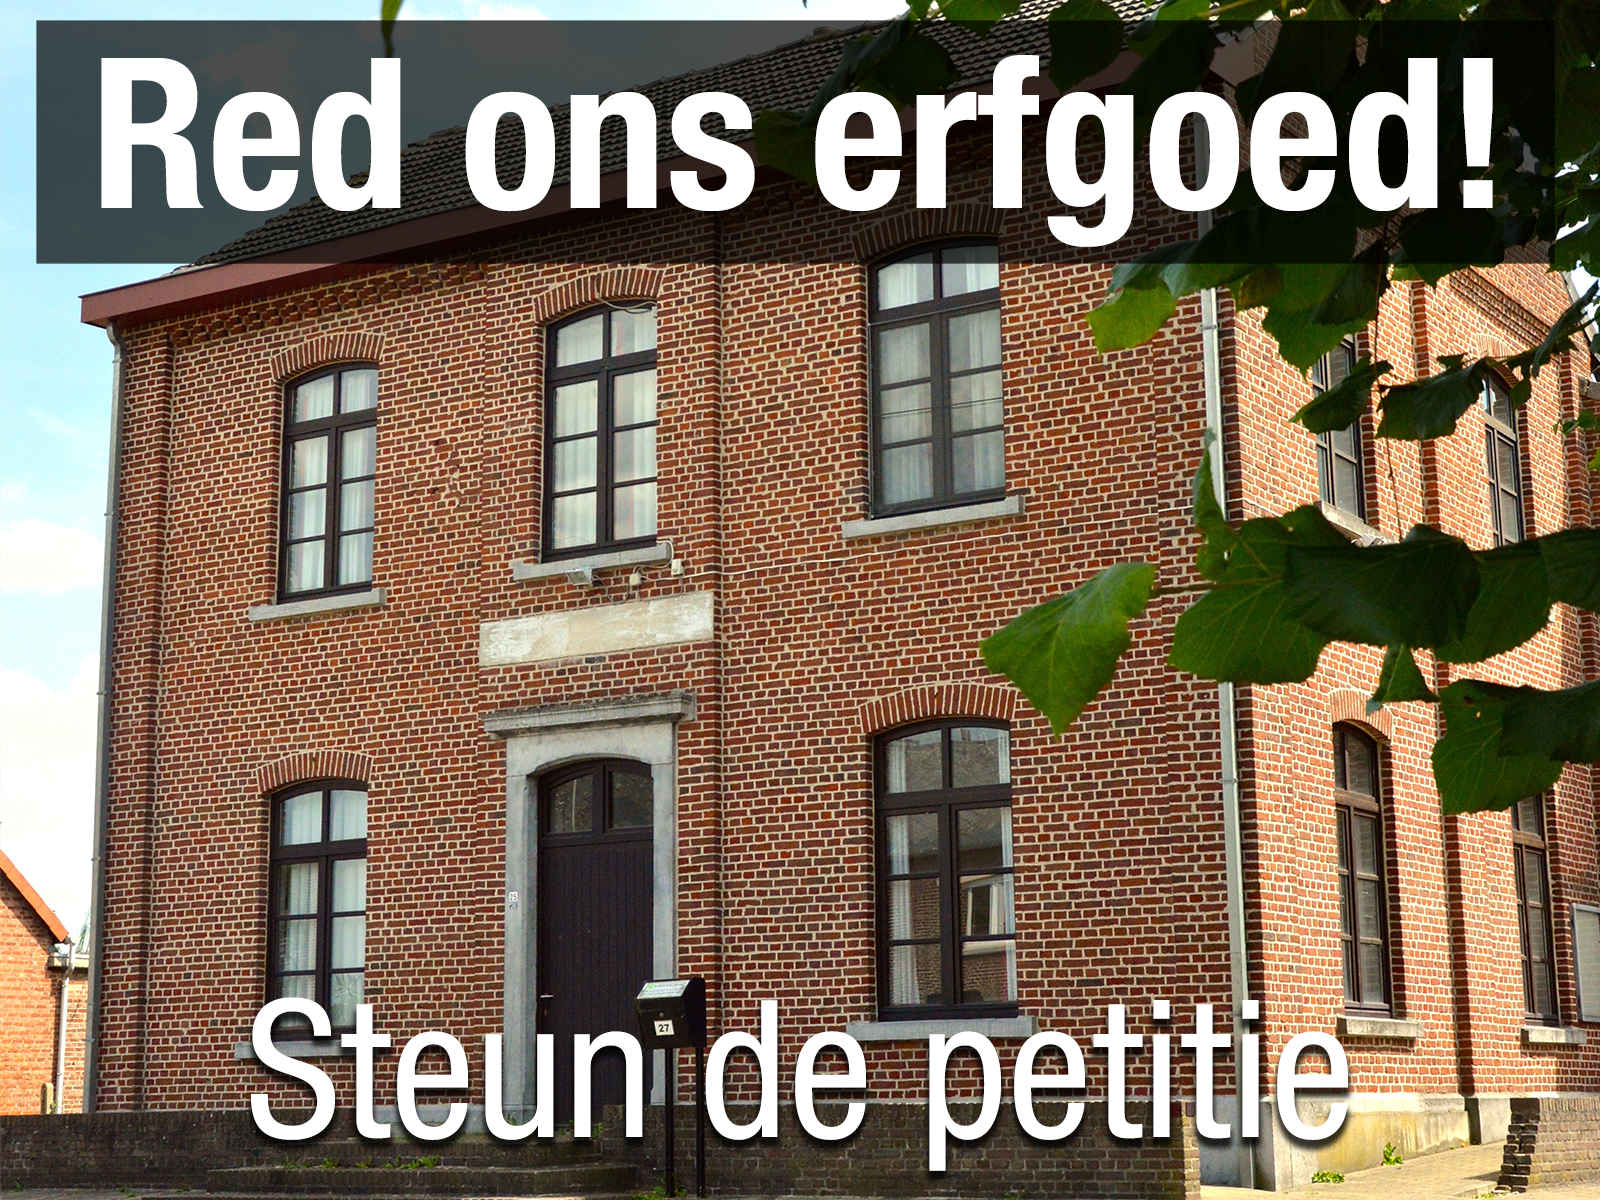 Affiche red ons erfgoed